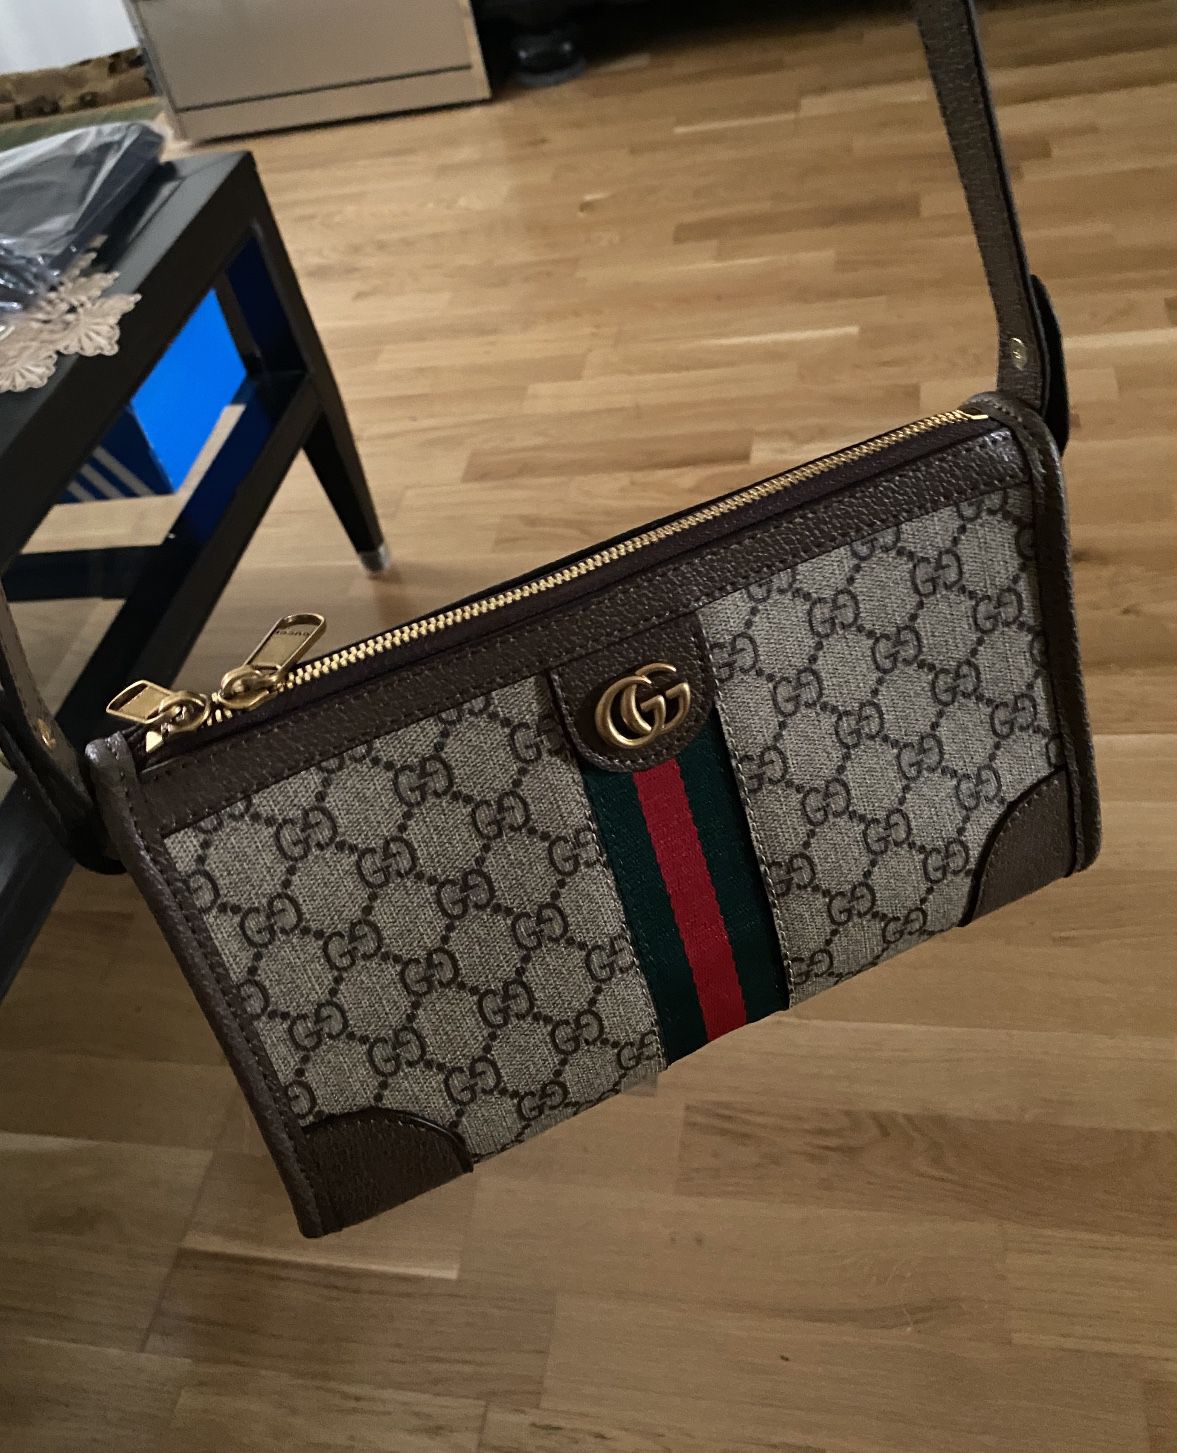 GG Gucci Messenger Side Bag for Sale in Chicago, IL - OfferUp